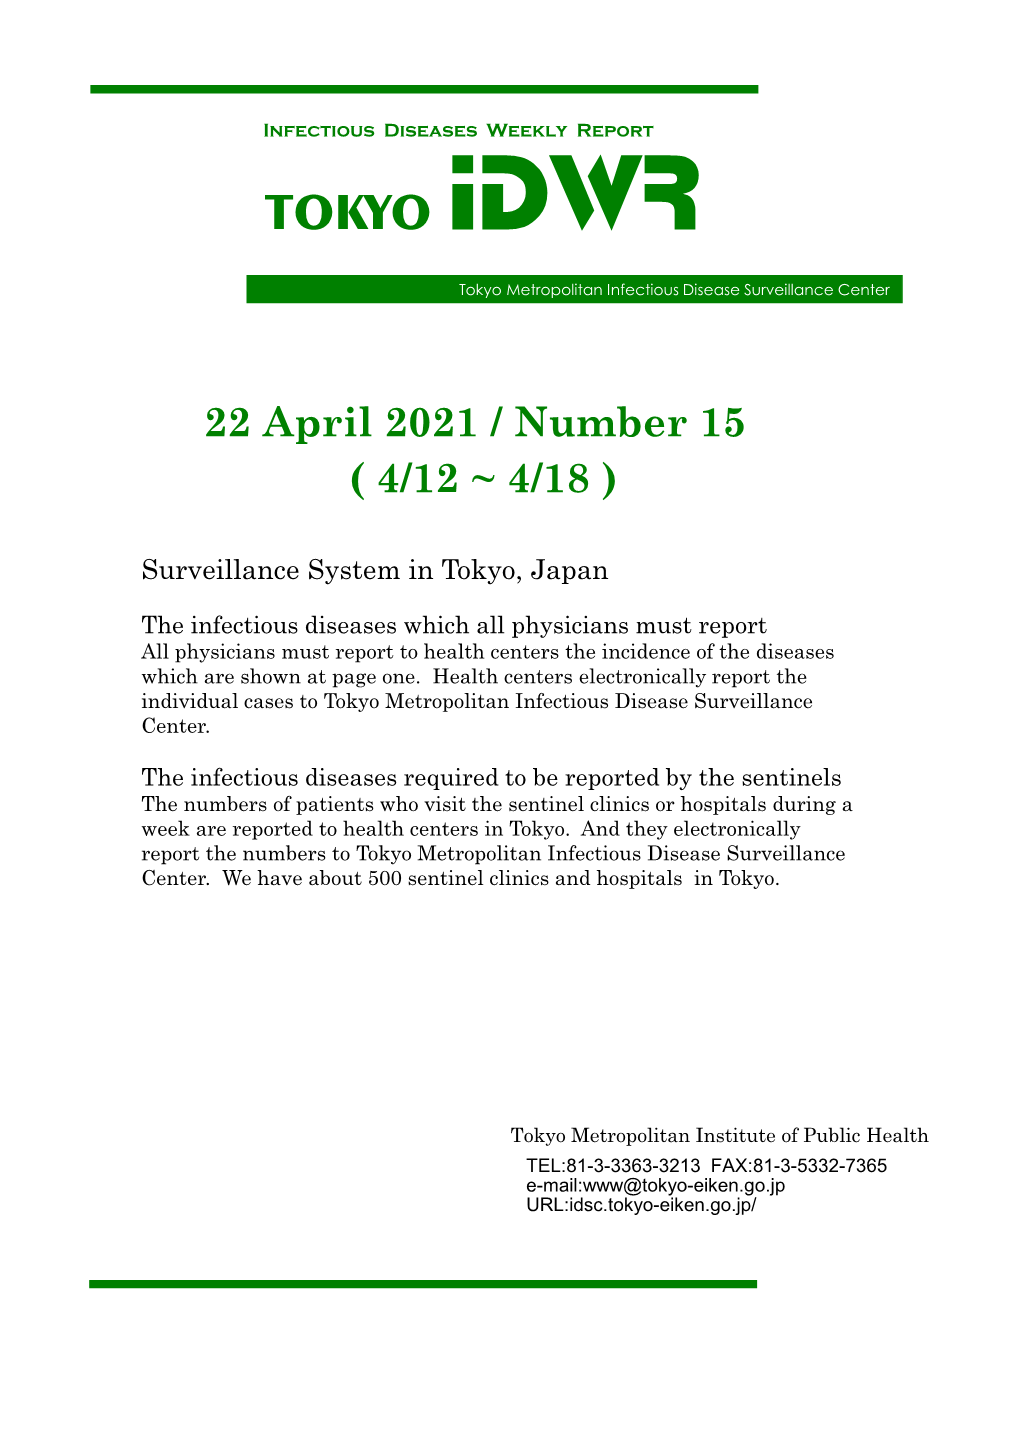 Infectious Diseases Weekly Report Tokyo